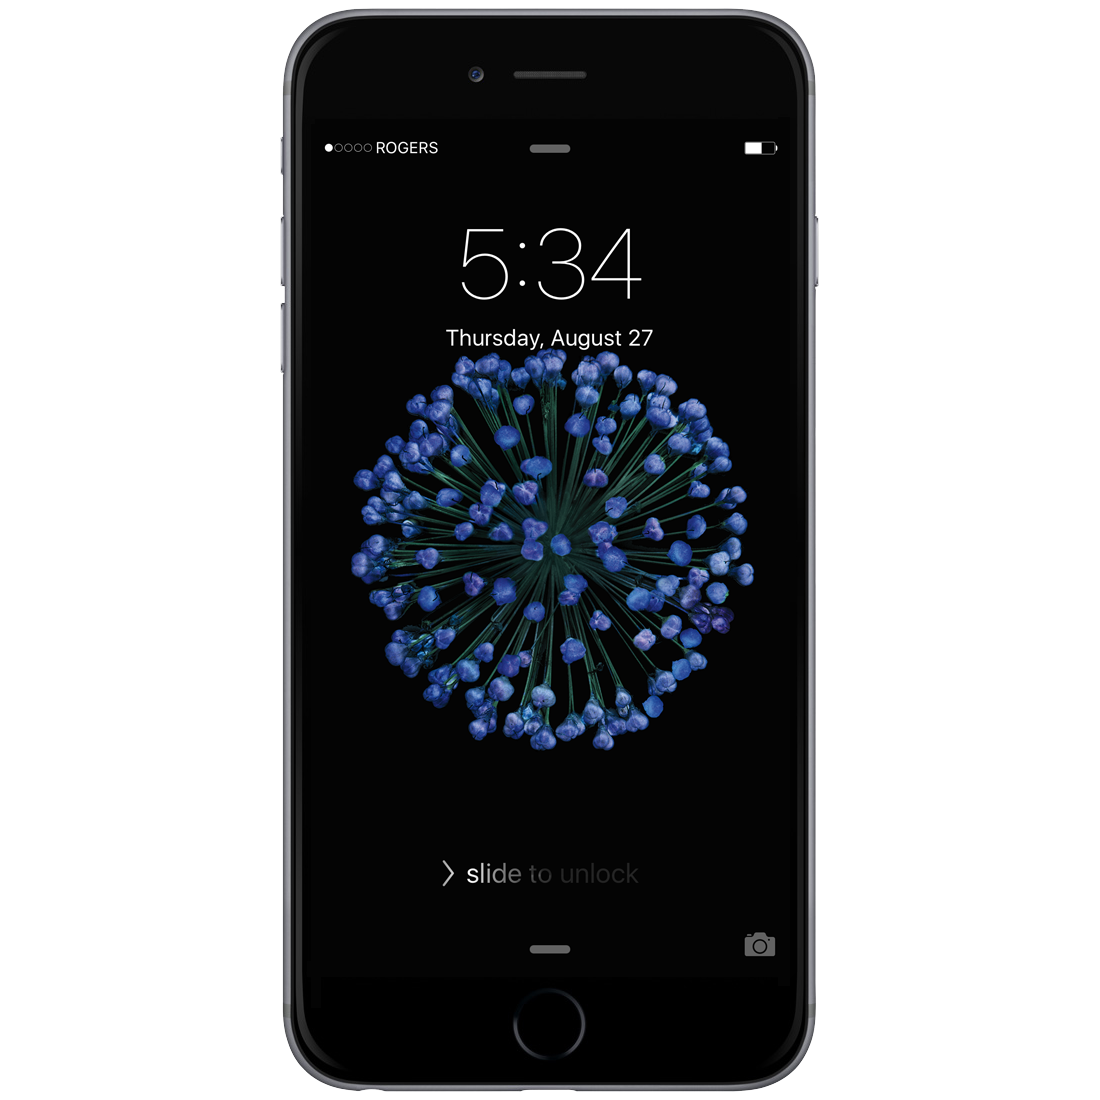 Iclarified Apple News iPhone 6s To Feature Motion Wallpaper